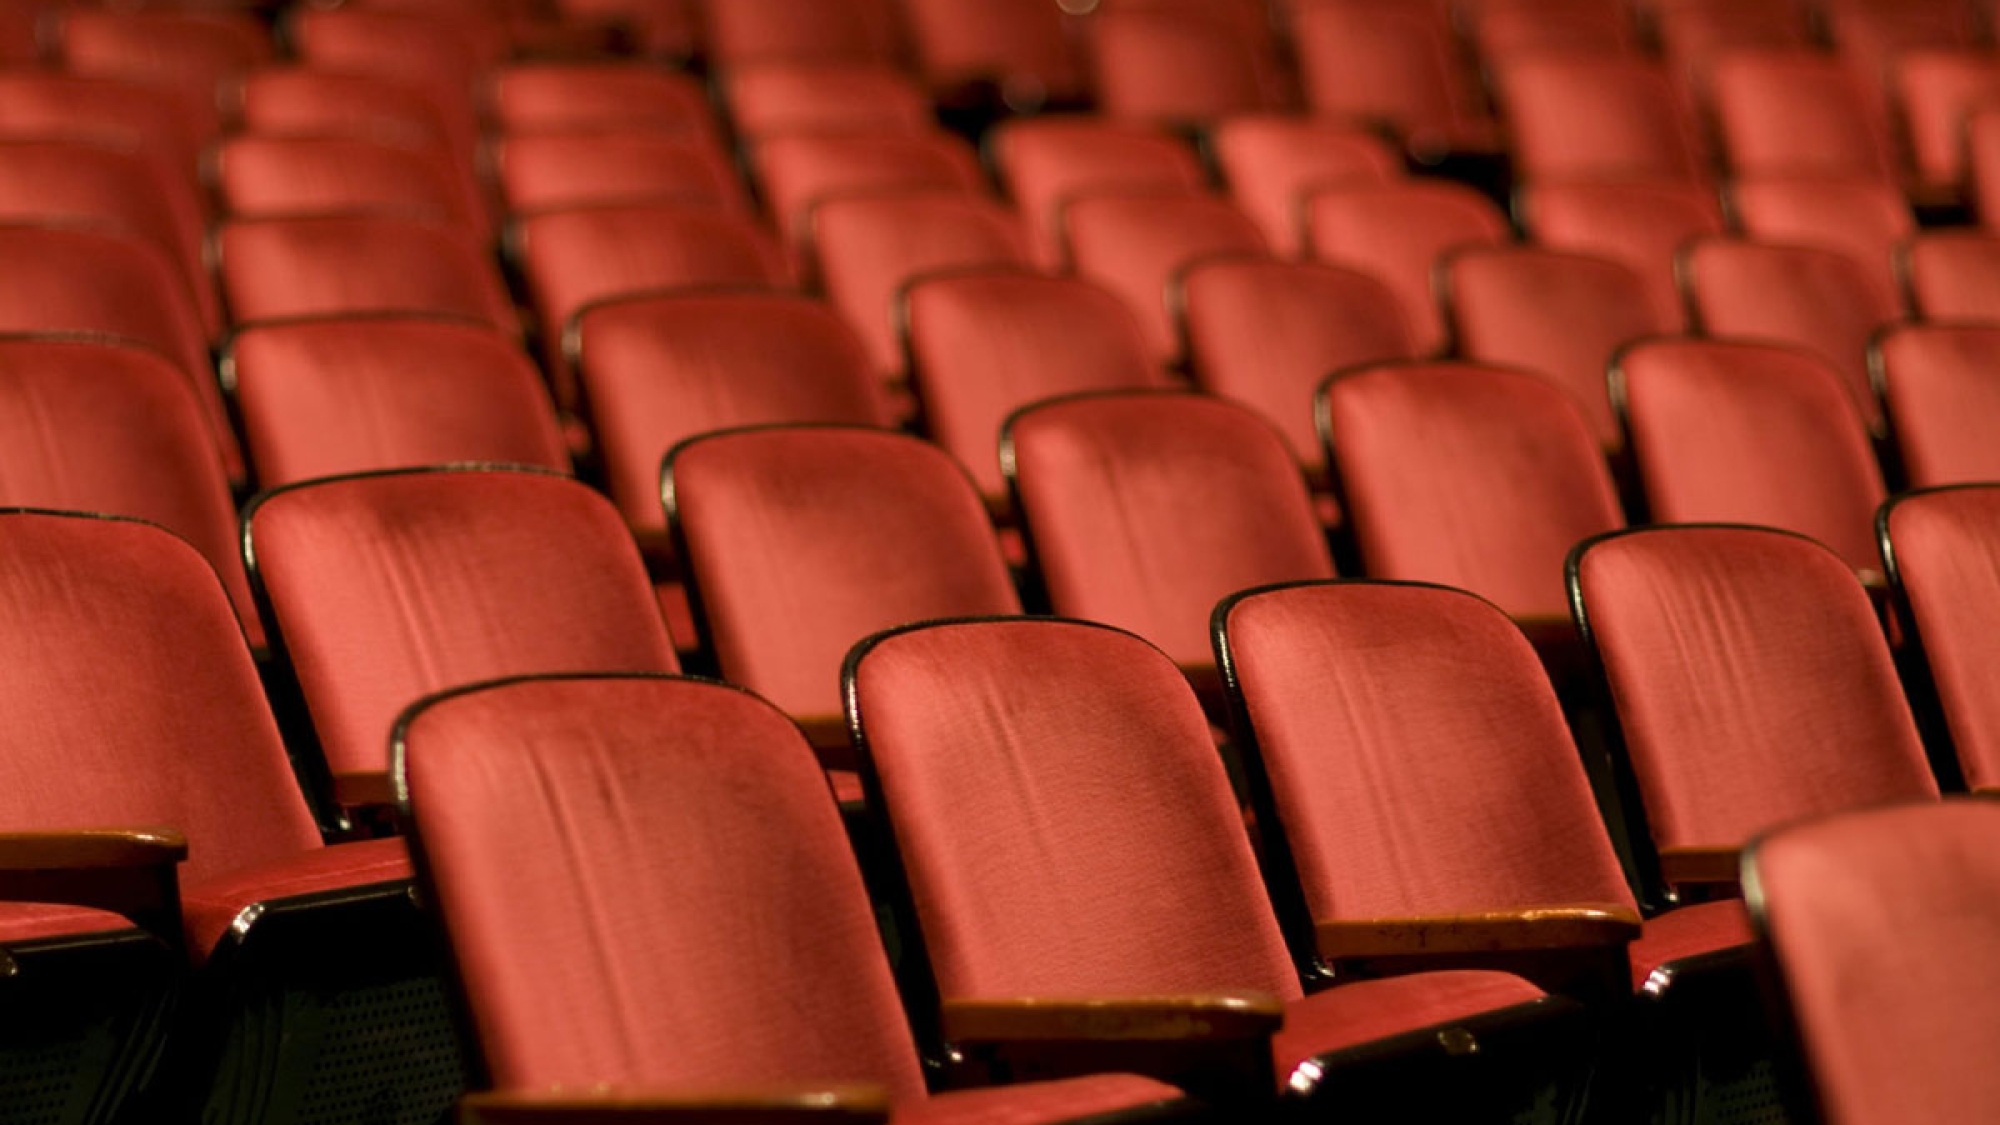 expert advice maintaining your auditorium seating for years to come